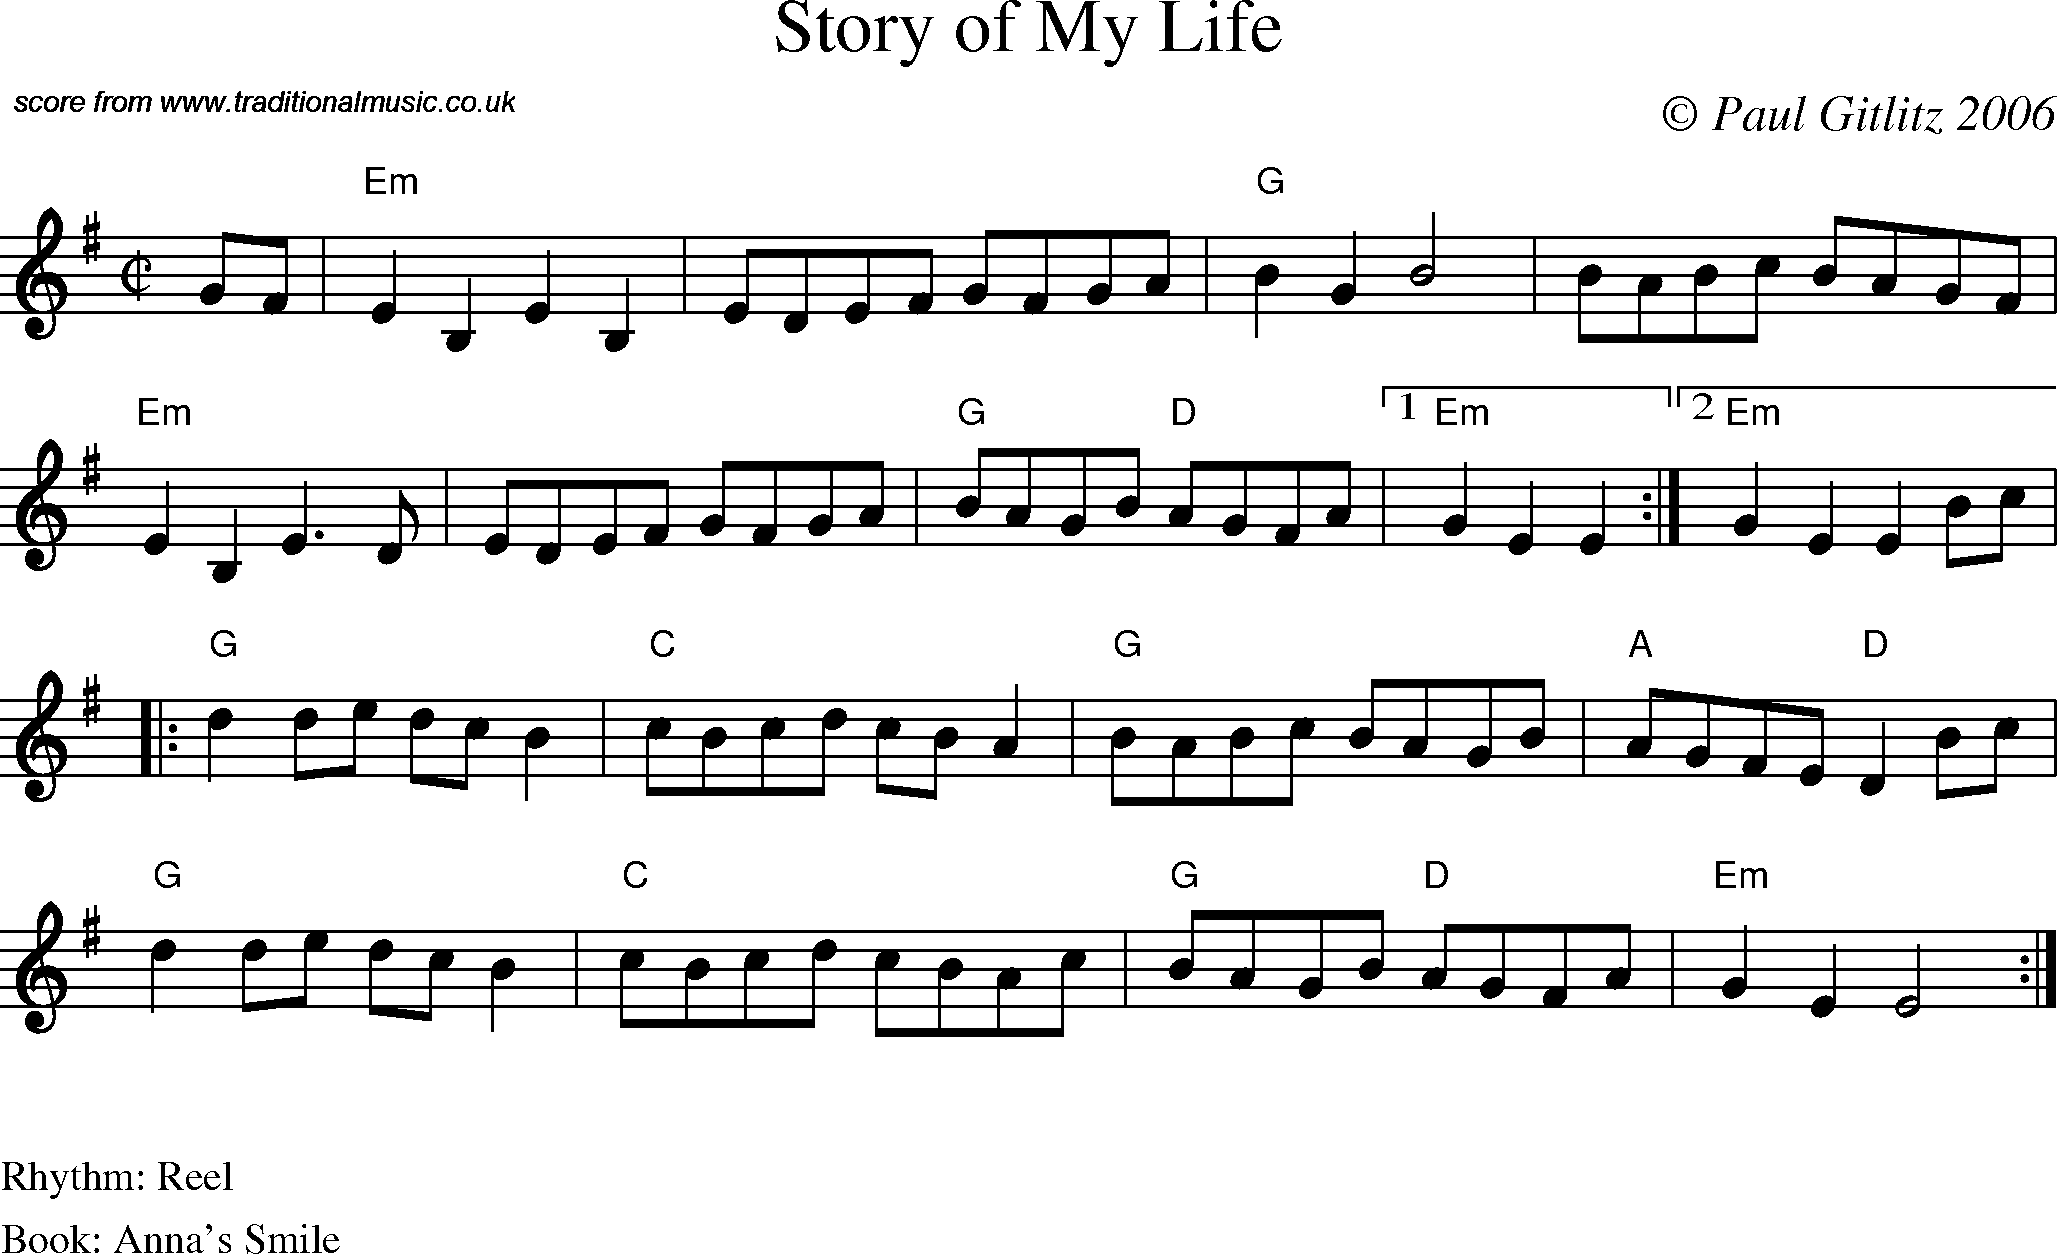 Sheet Music Score for Reel - Story of My Life